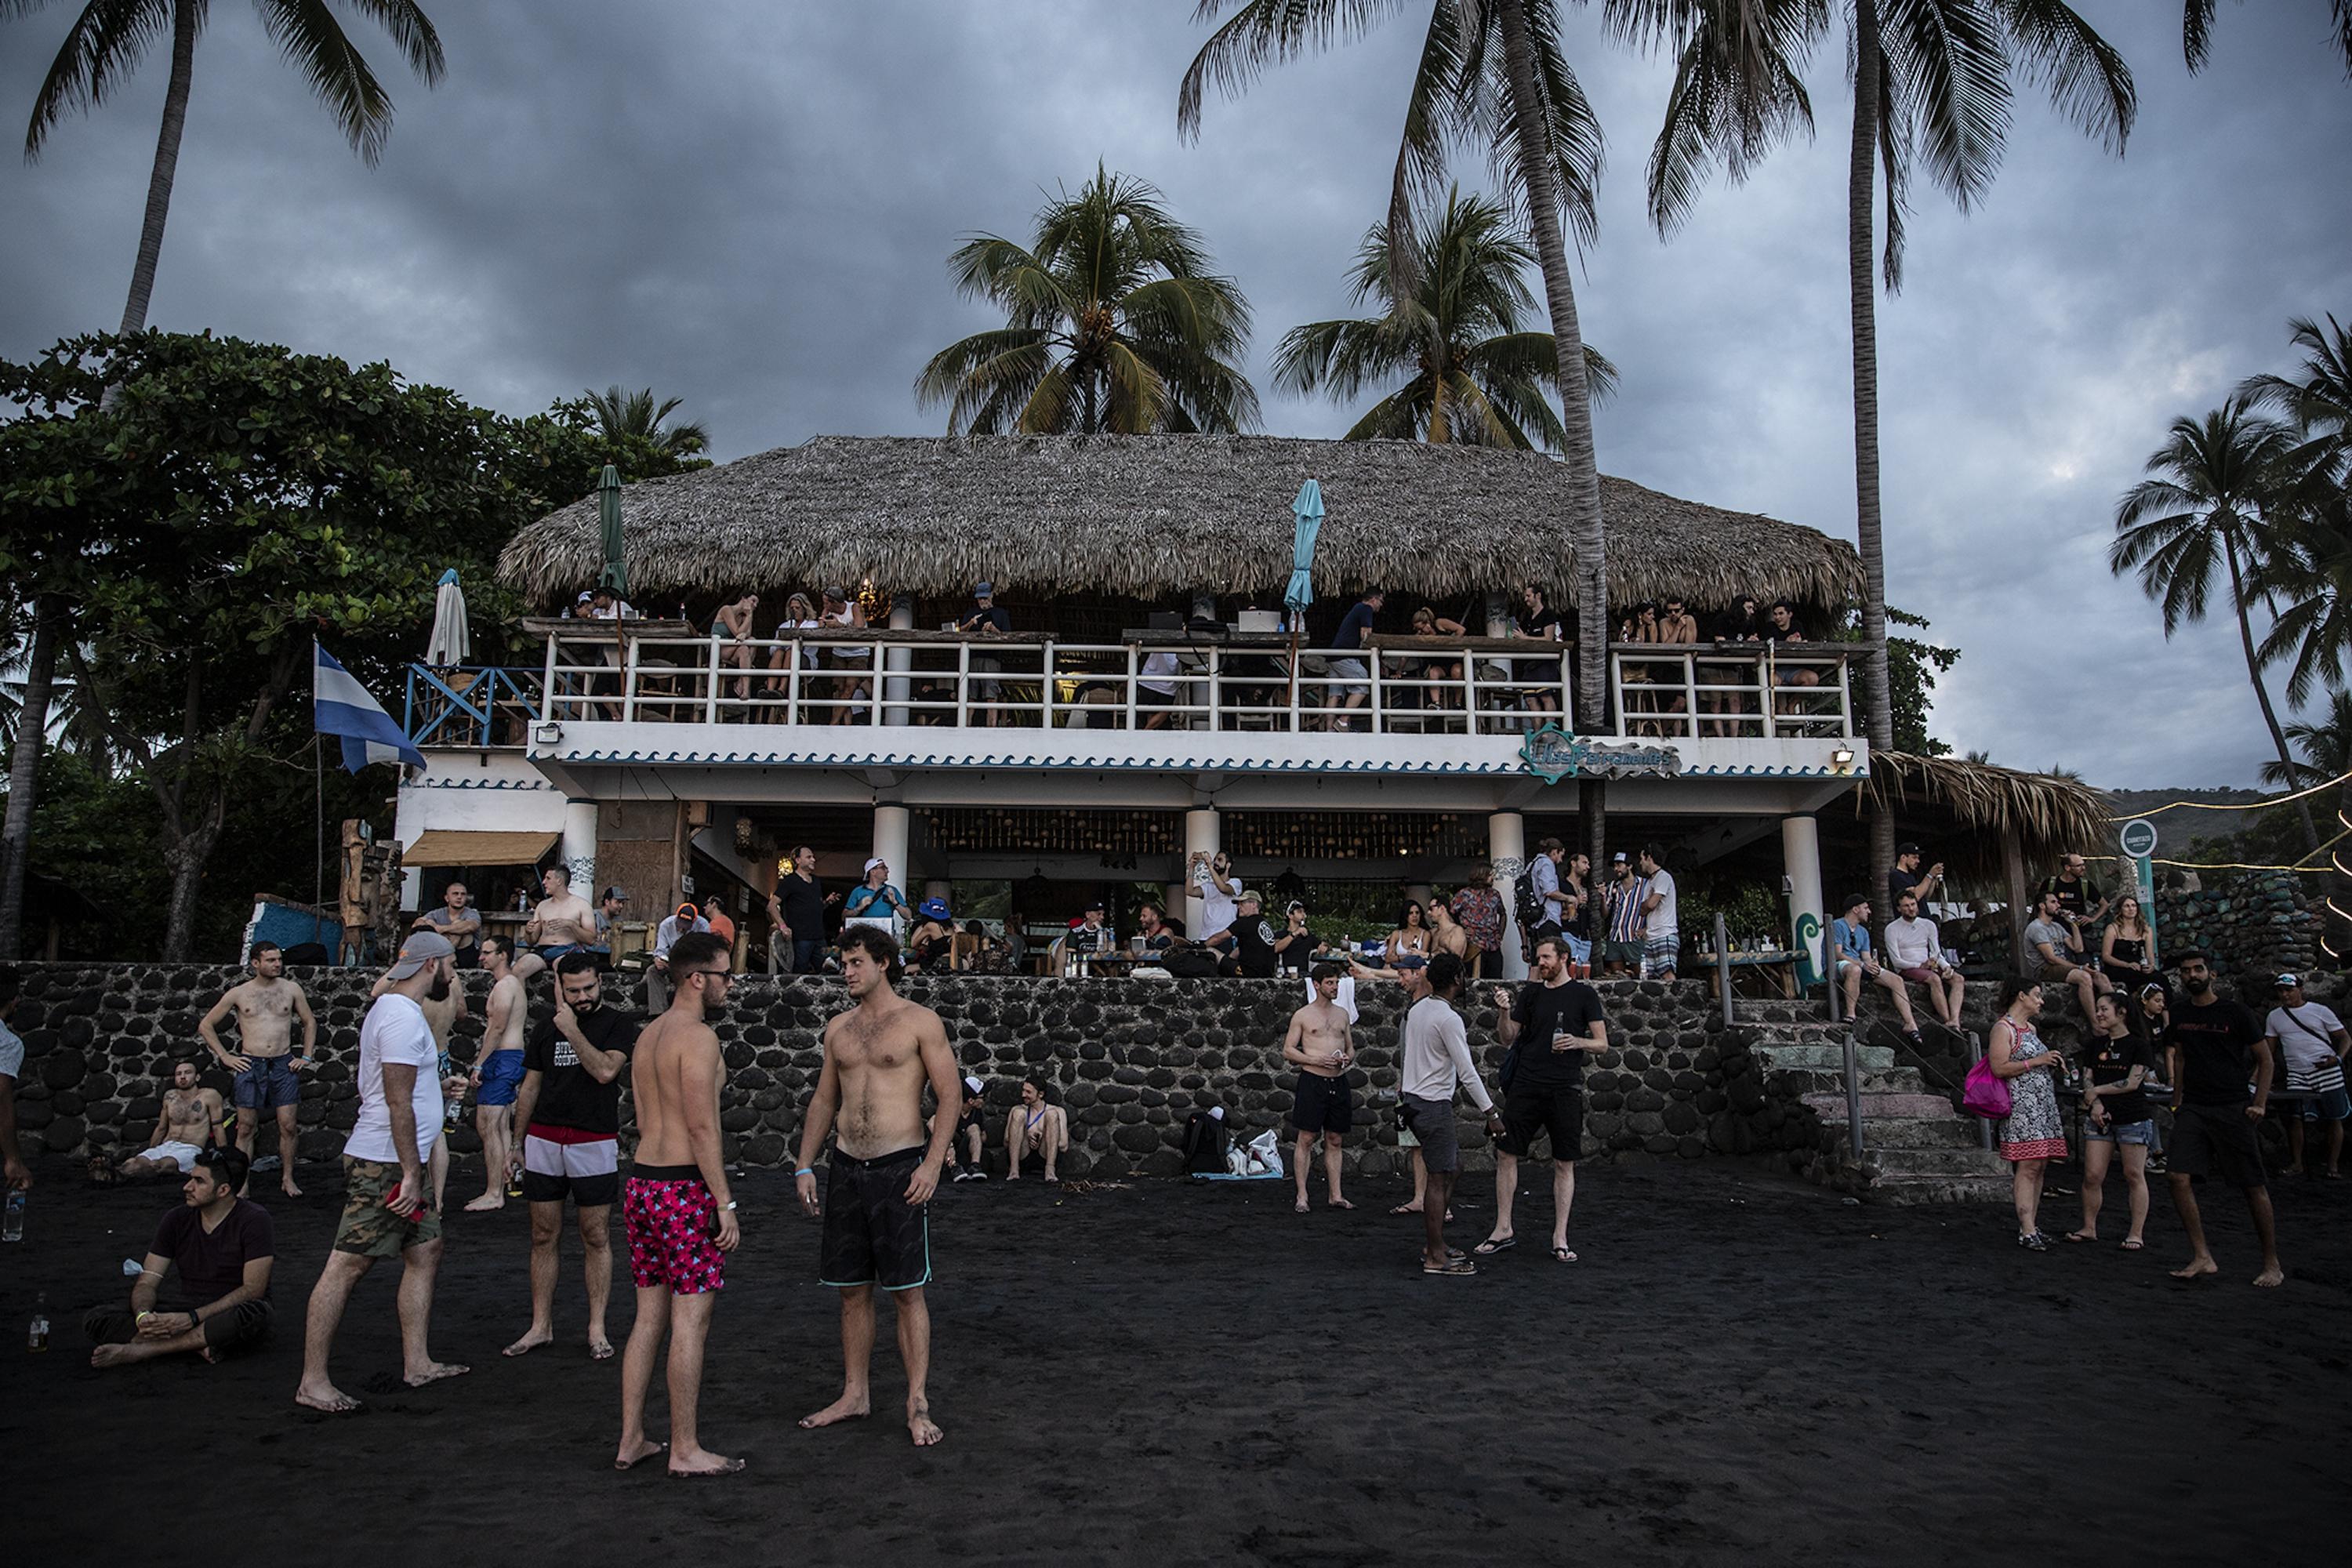 At the conclusion of Bitcoin Week in November 2021, bitcoin enthusiasts ended the day at El Zonte Beach, the cradle of cryptocurrency in El Salvador. Photo Carlos Barrera